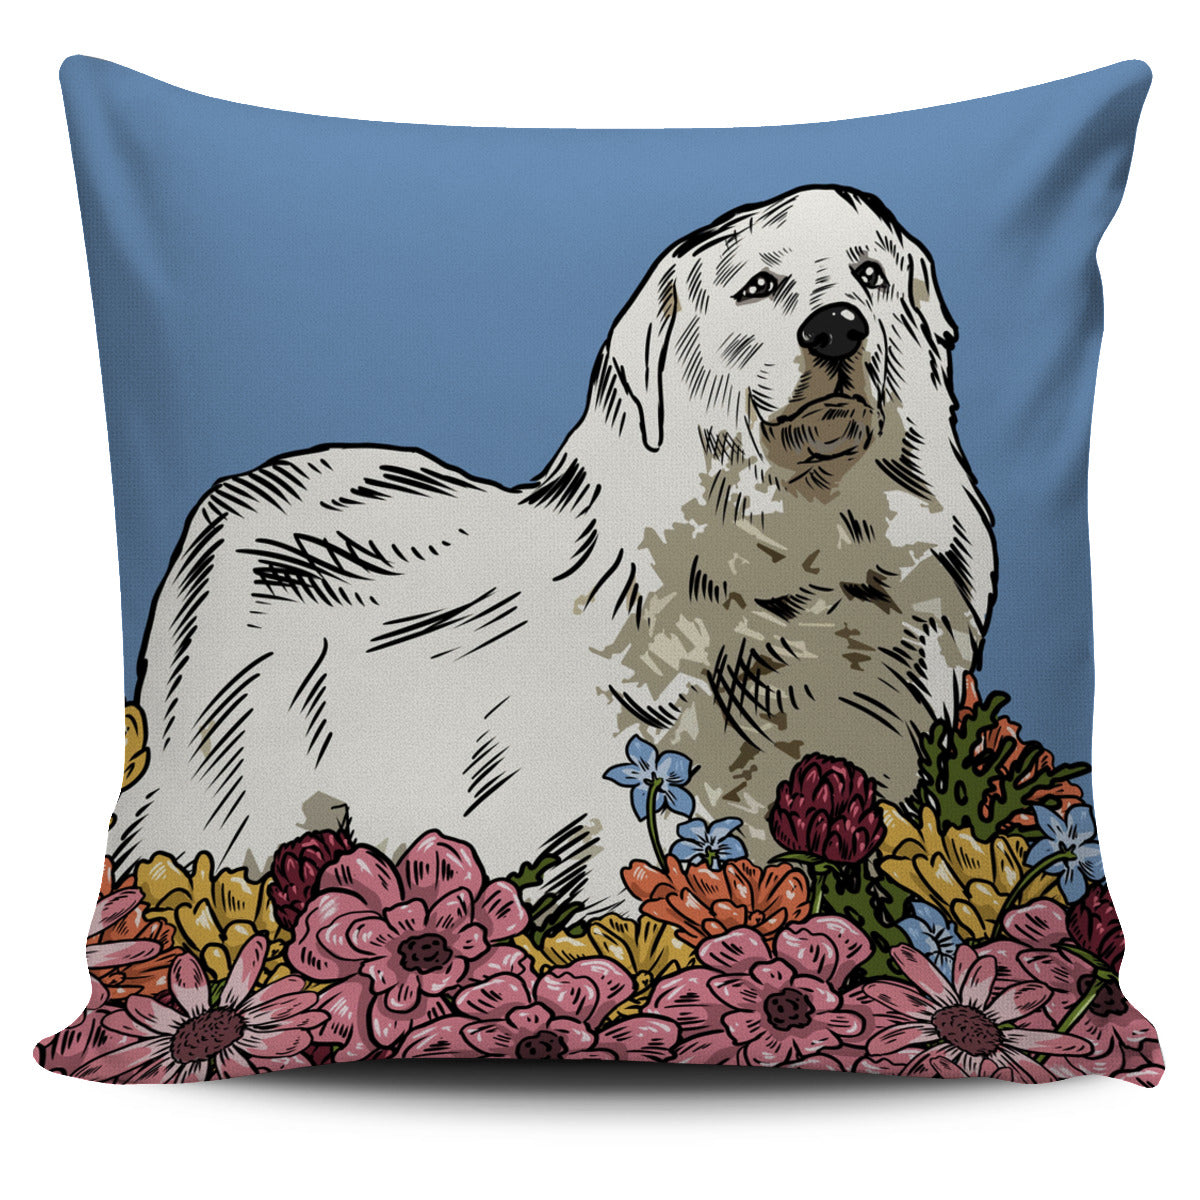 Illustrated Great Pyrenees Pillow Cover